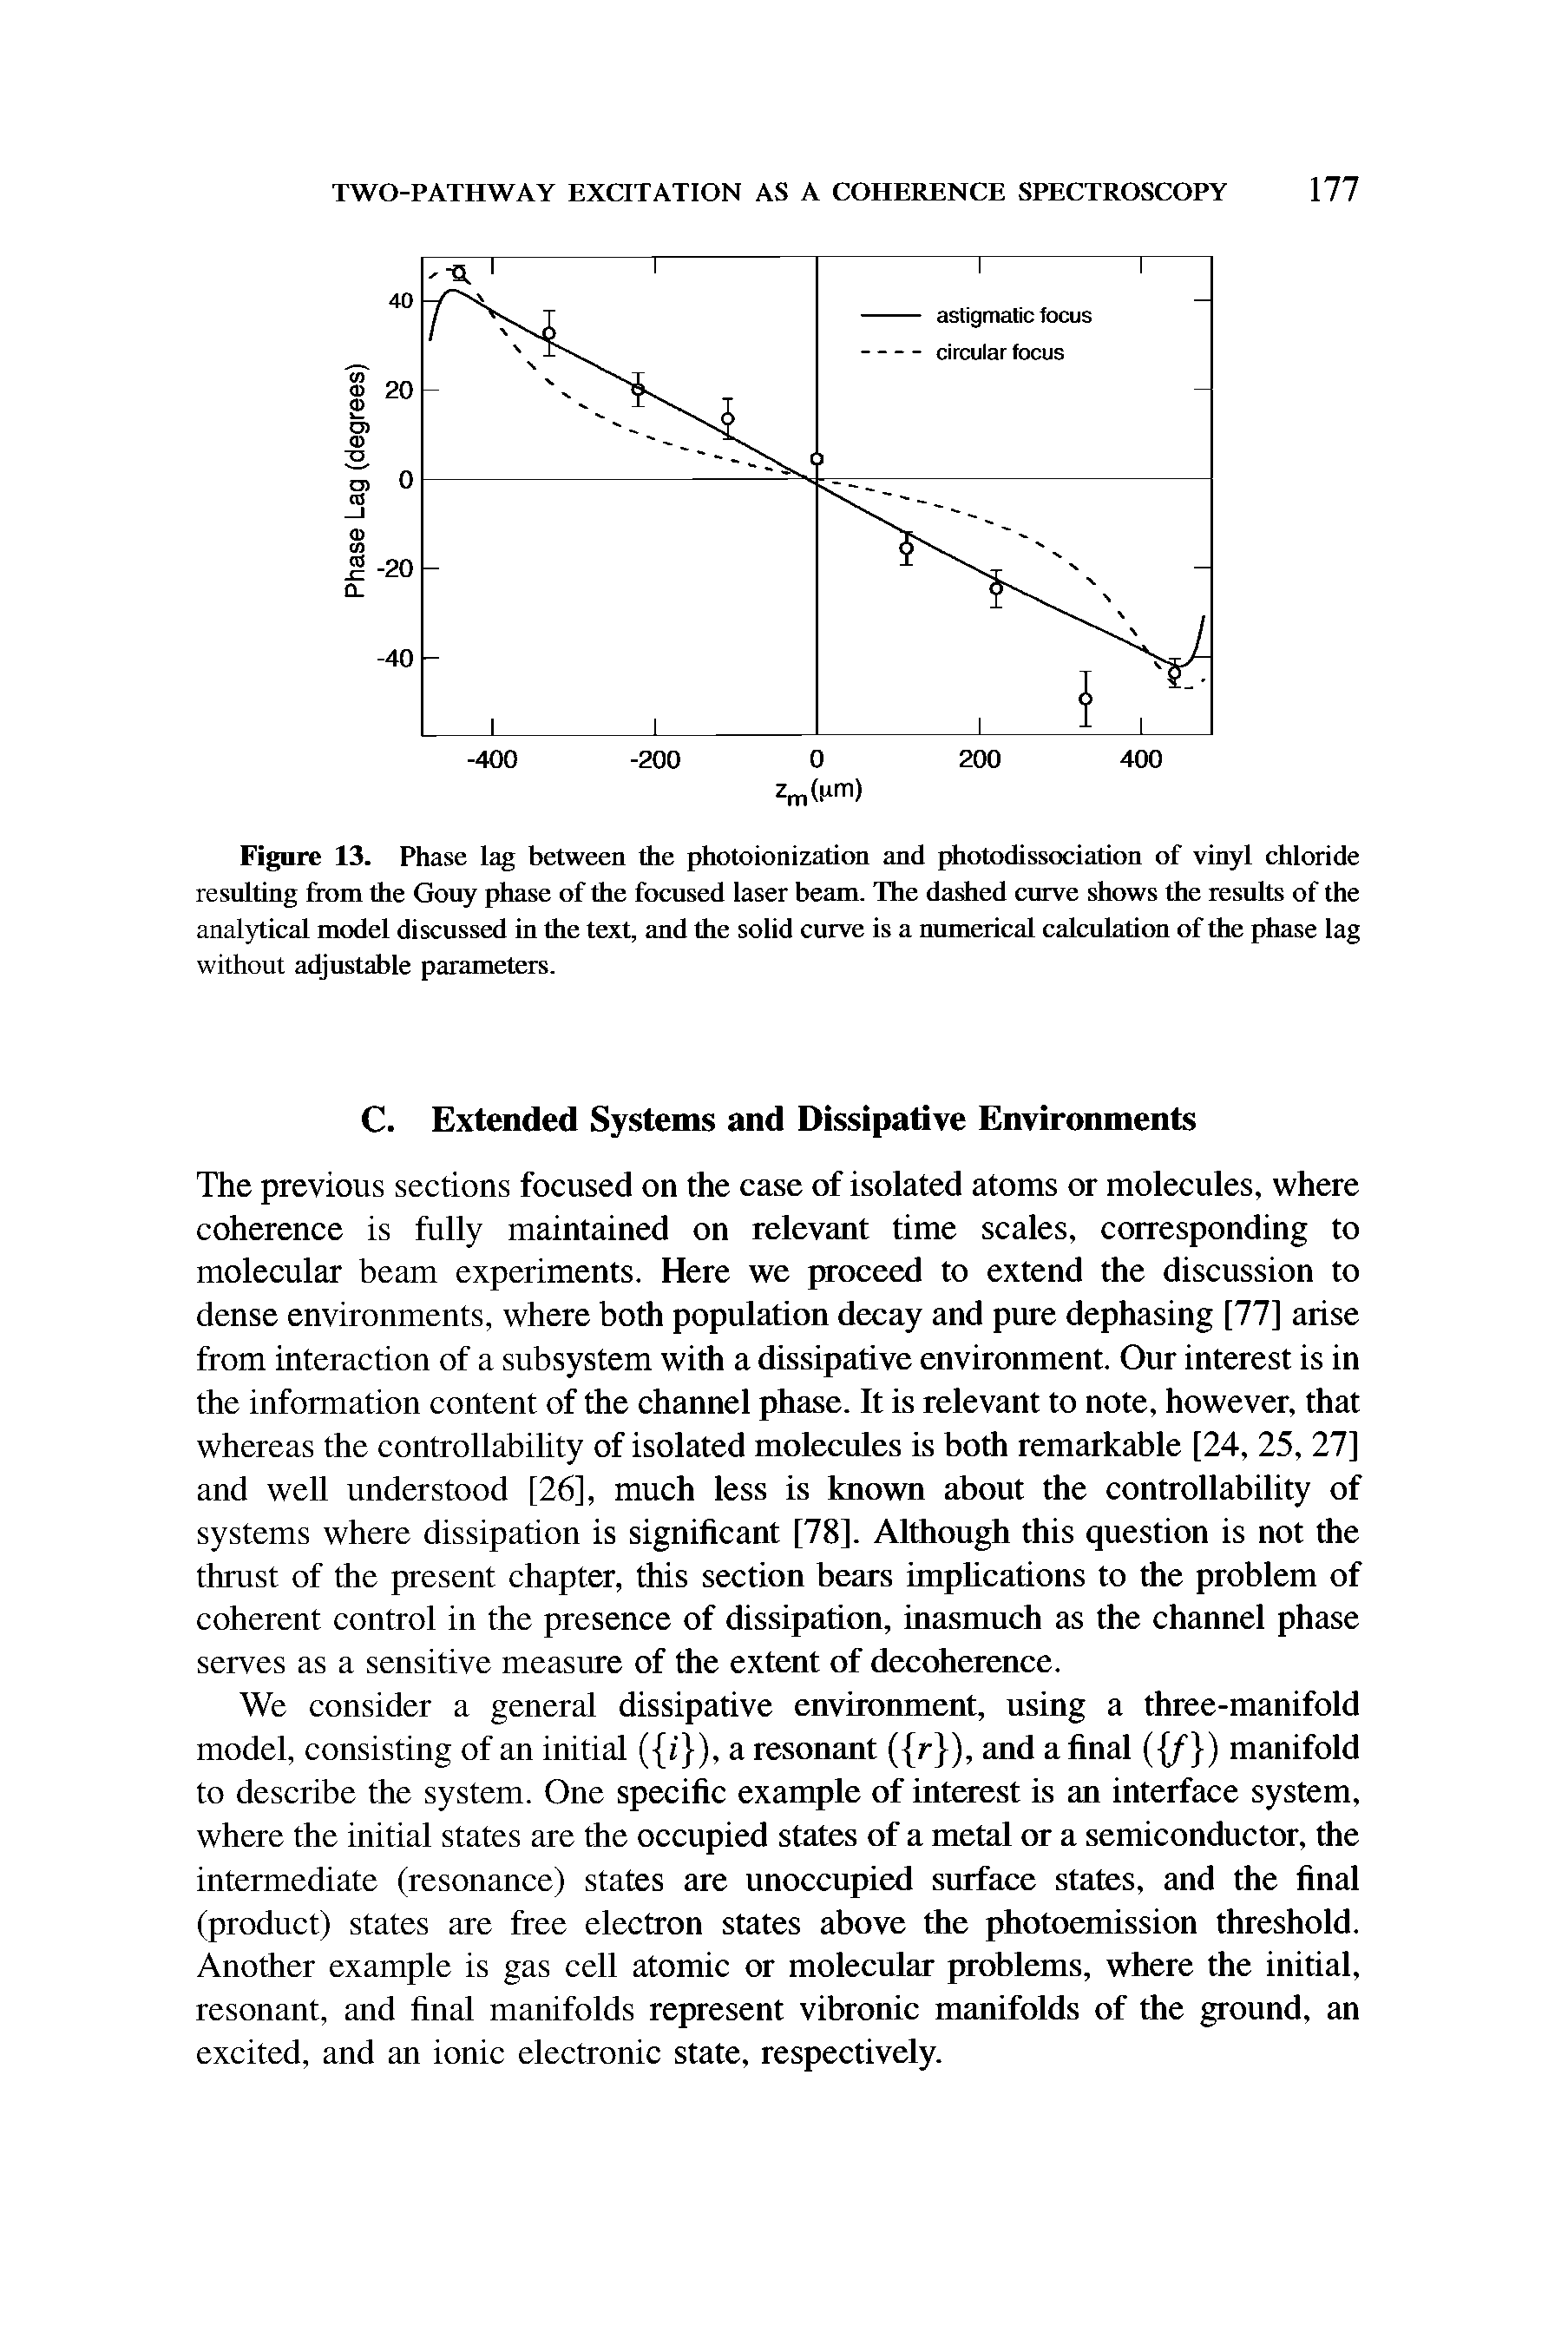 Figure 13. Phase lag between the photoionization and photodissociation of vinyl chloride resulting from the Gouy phase of the focused laser beam. The dashed curve shows the results of the analytical model discussed in the text, and the solid curve is a numerical calculation of the phase lag without adjustable parameters.